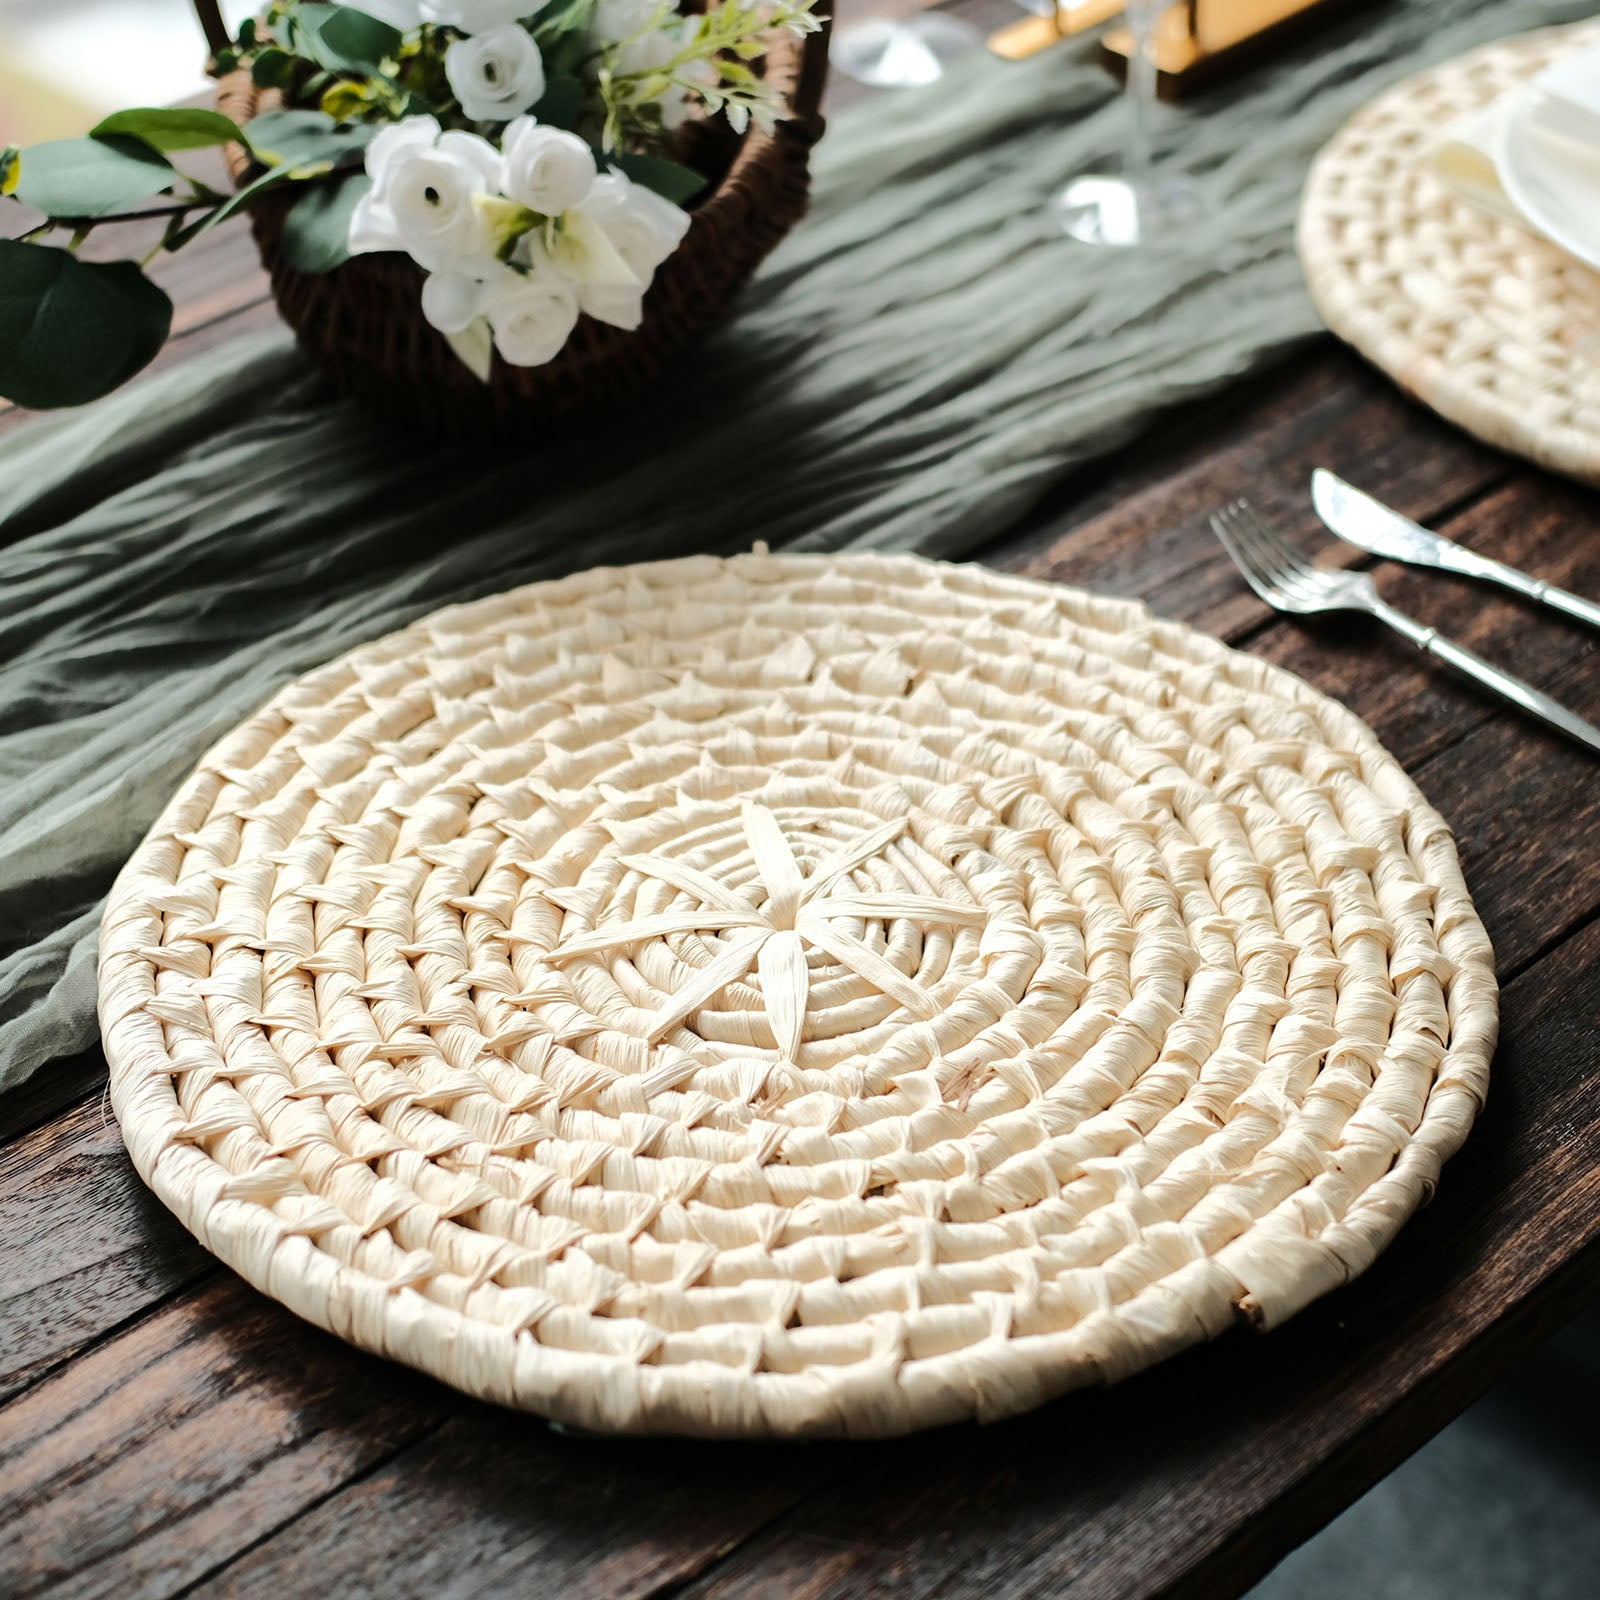 Efavormart 4 | Natural Corn Husk 15" Round Woven Placemats, Braided Rustic Rattan Tablemats -